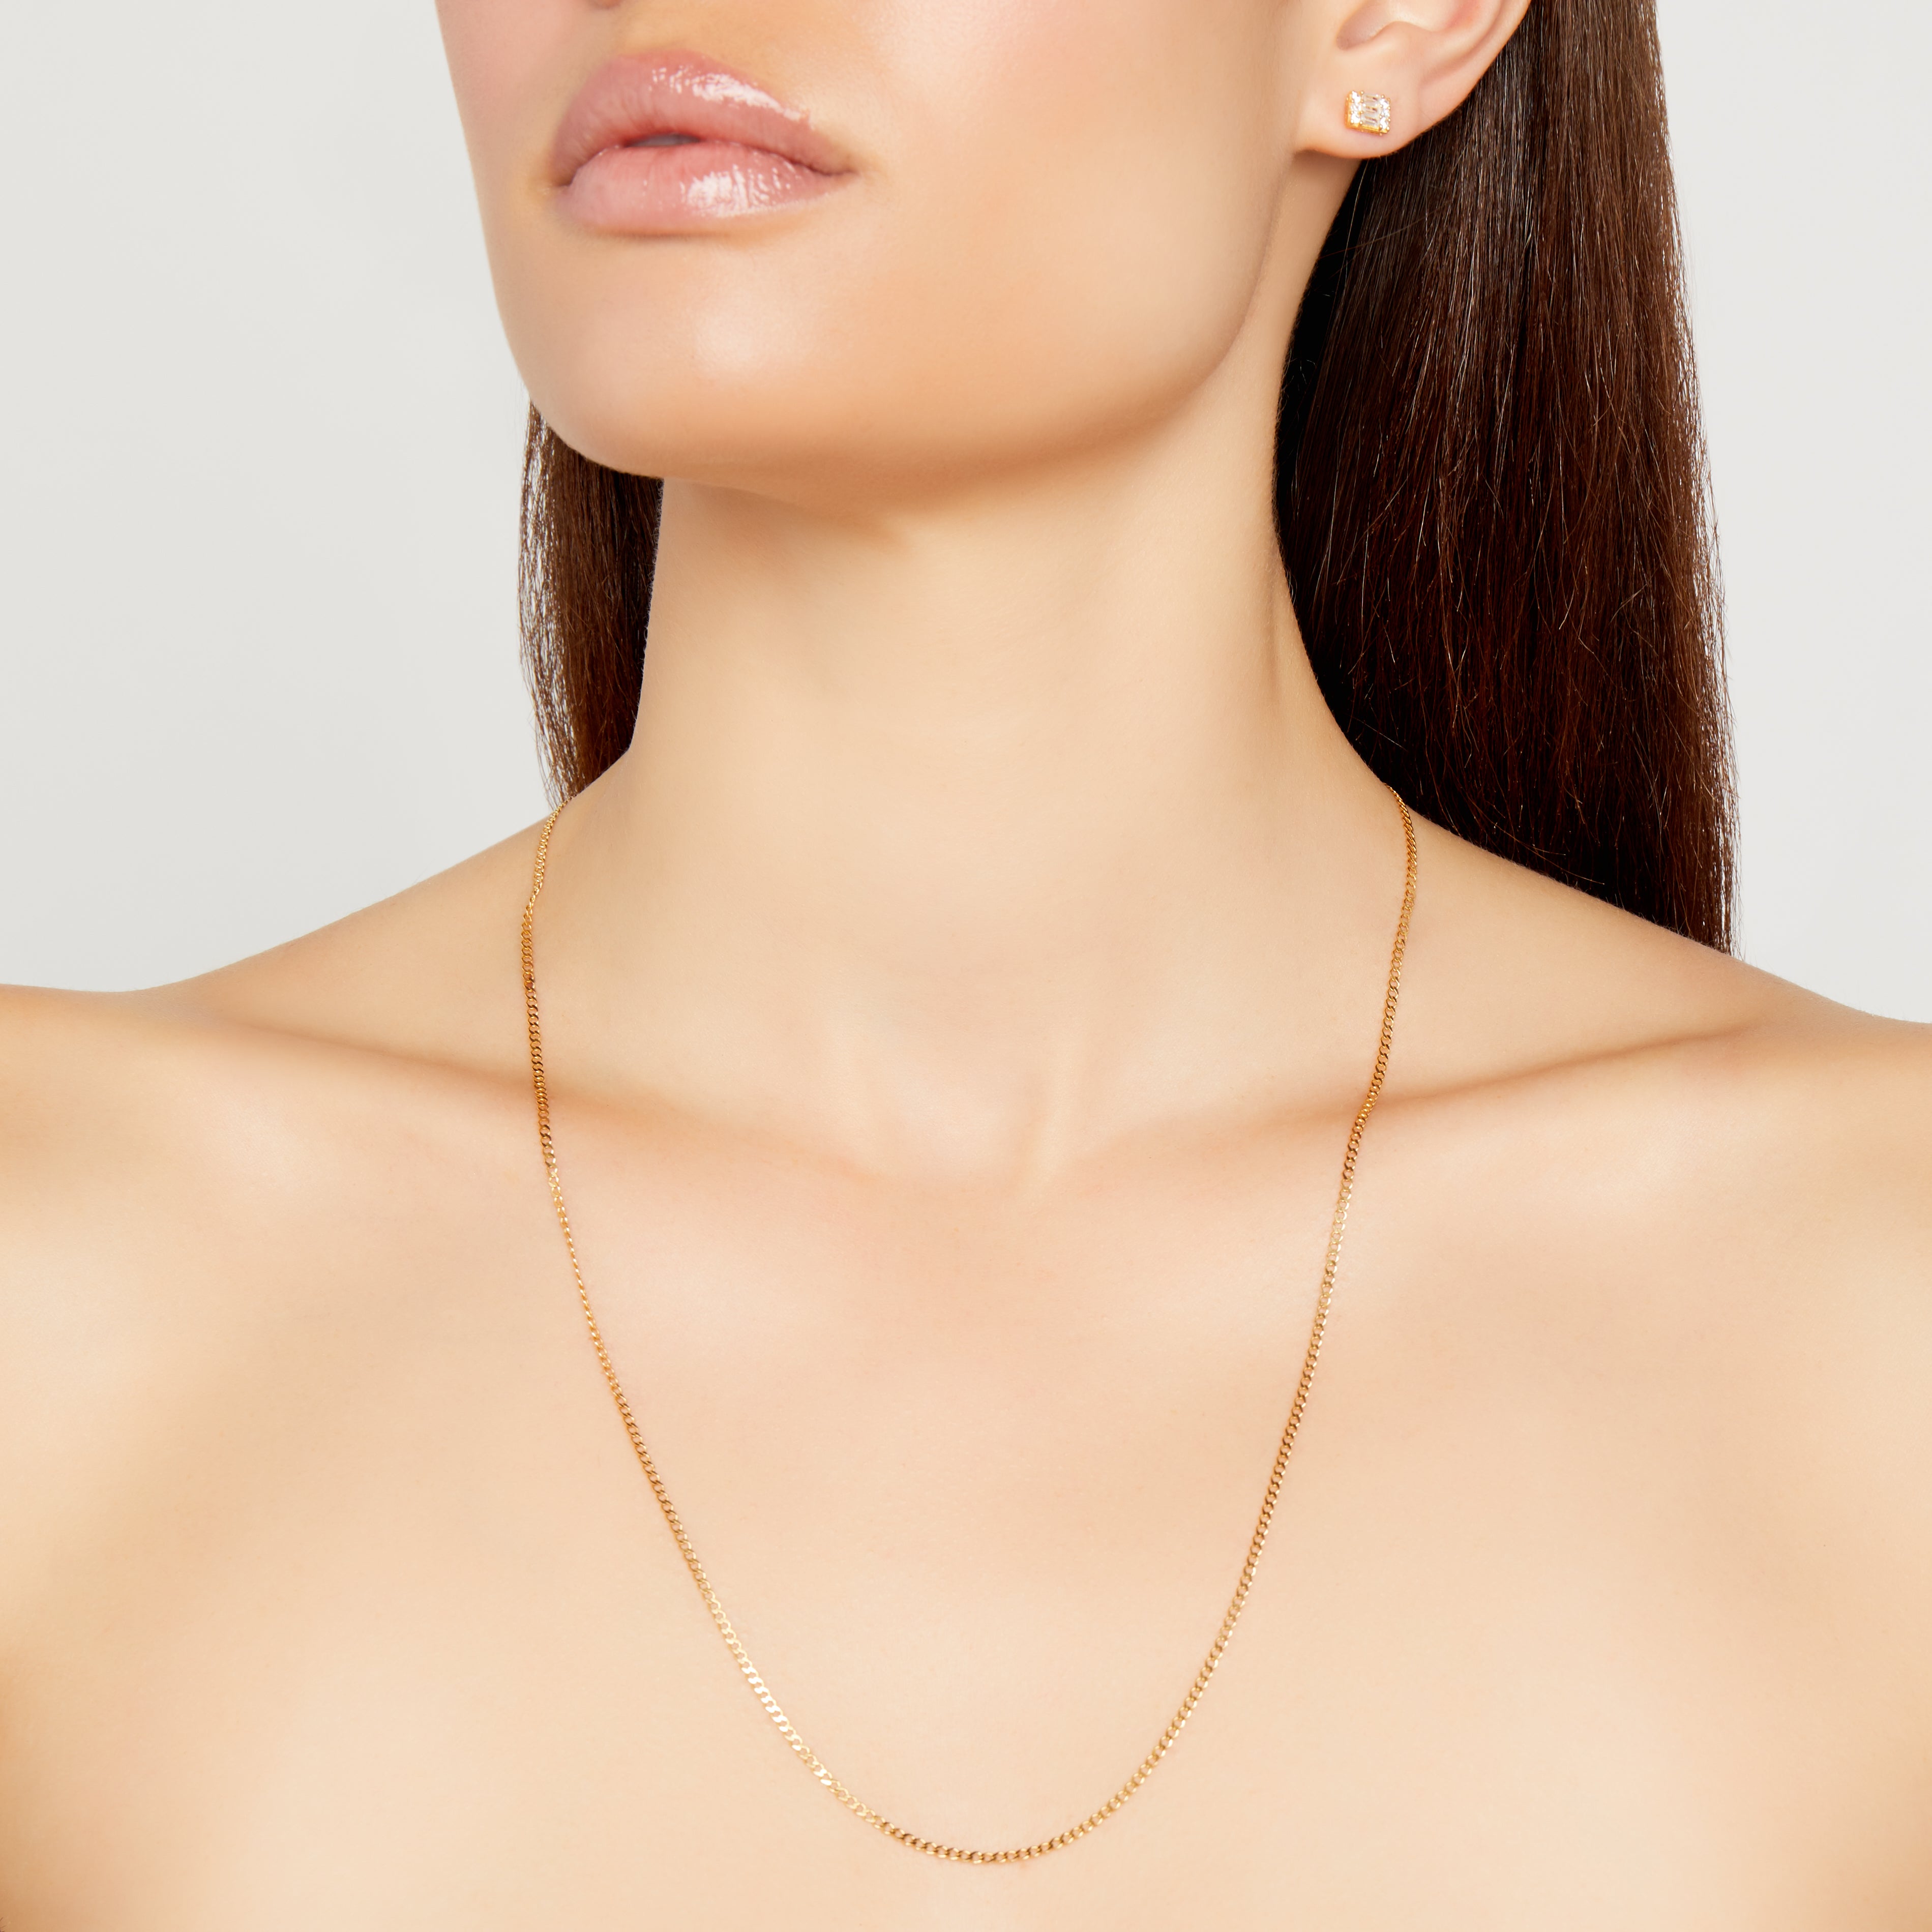 THE DAINTY CHAIN NECKLACE